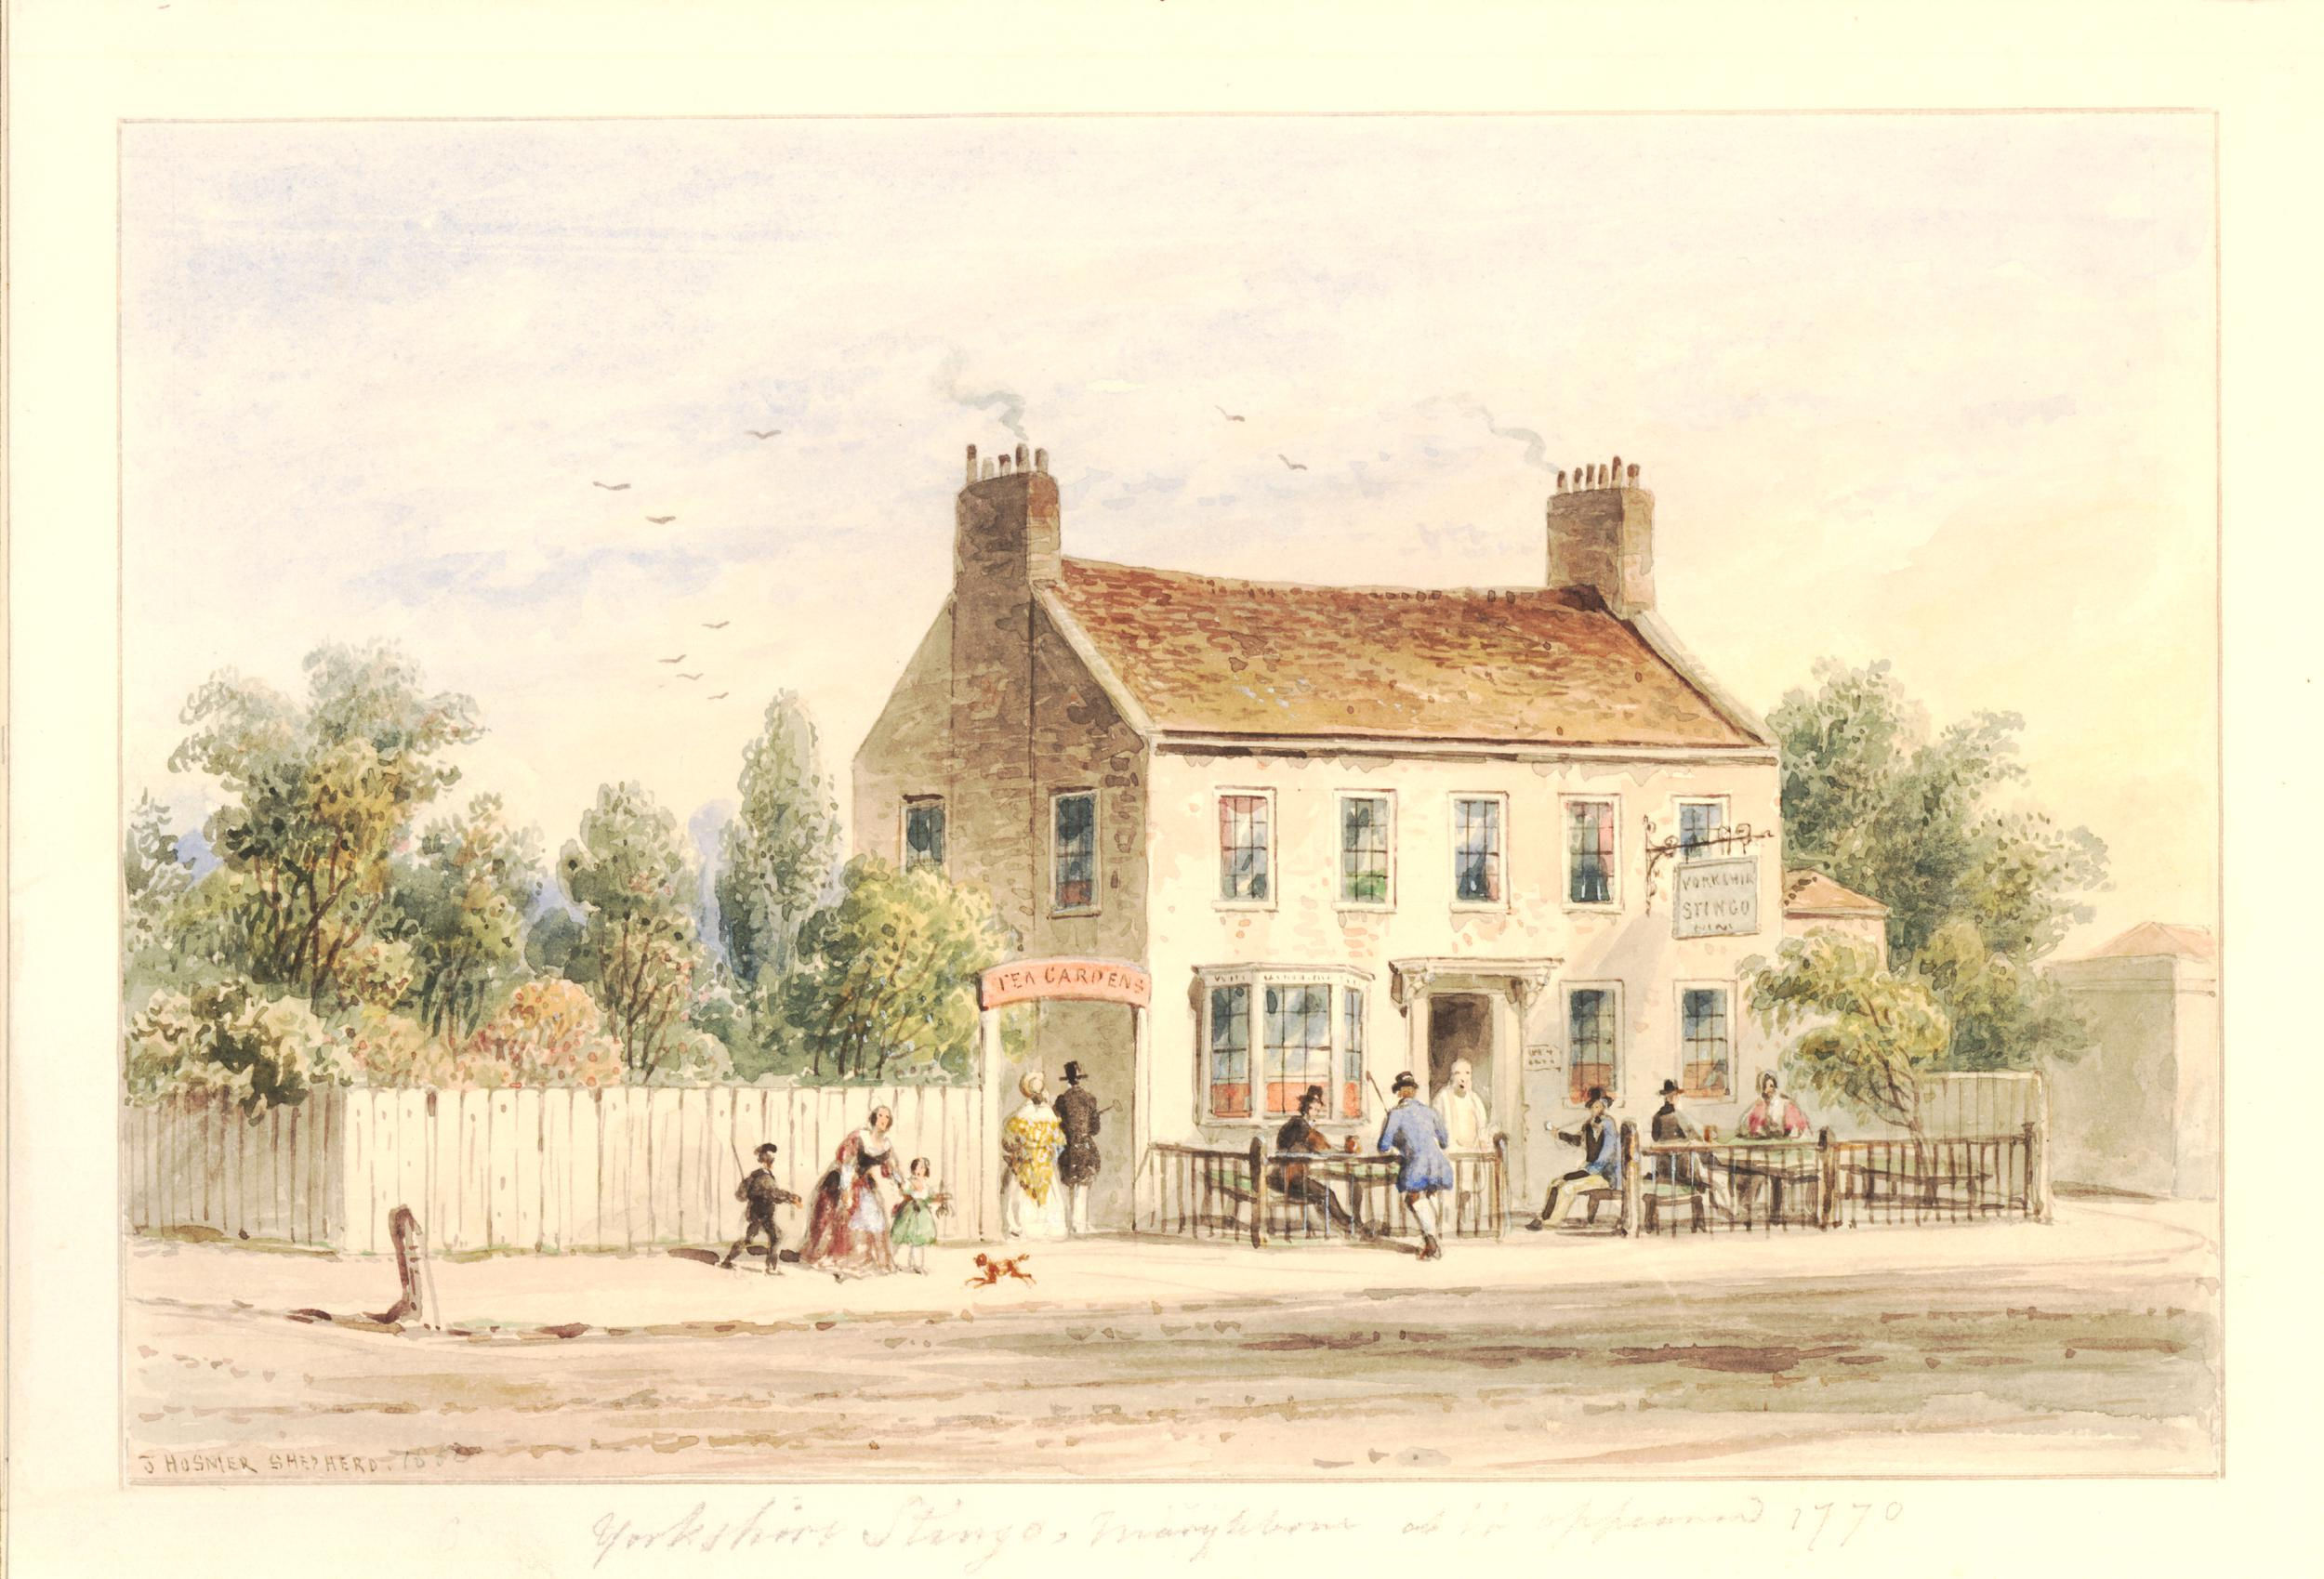 Water color painting of a two-story pub with fenced front yard where several patrons are sitting.